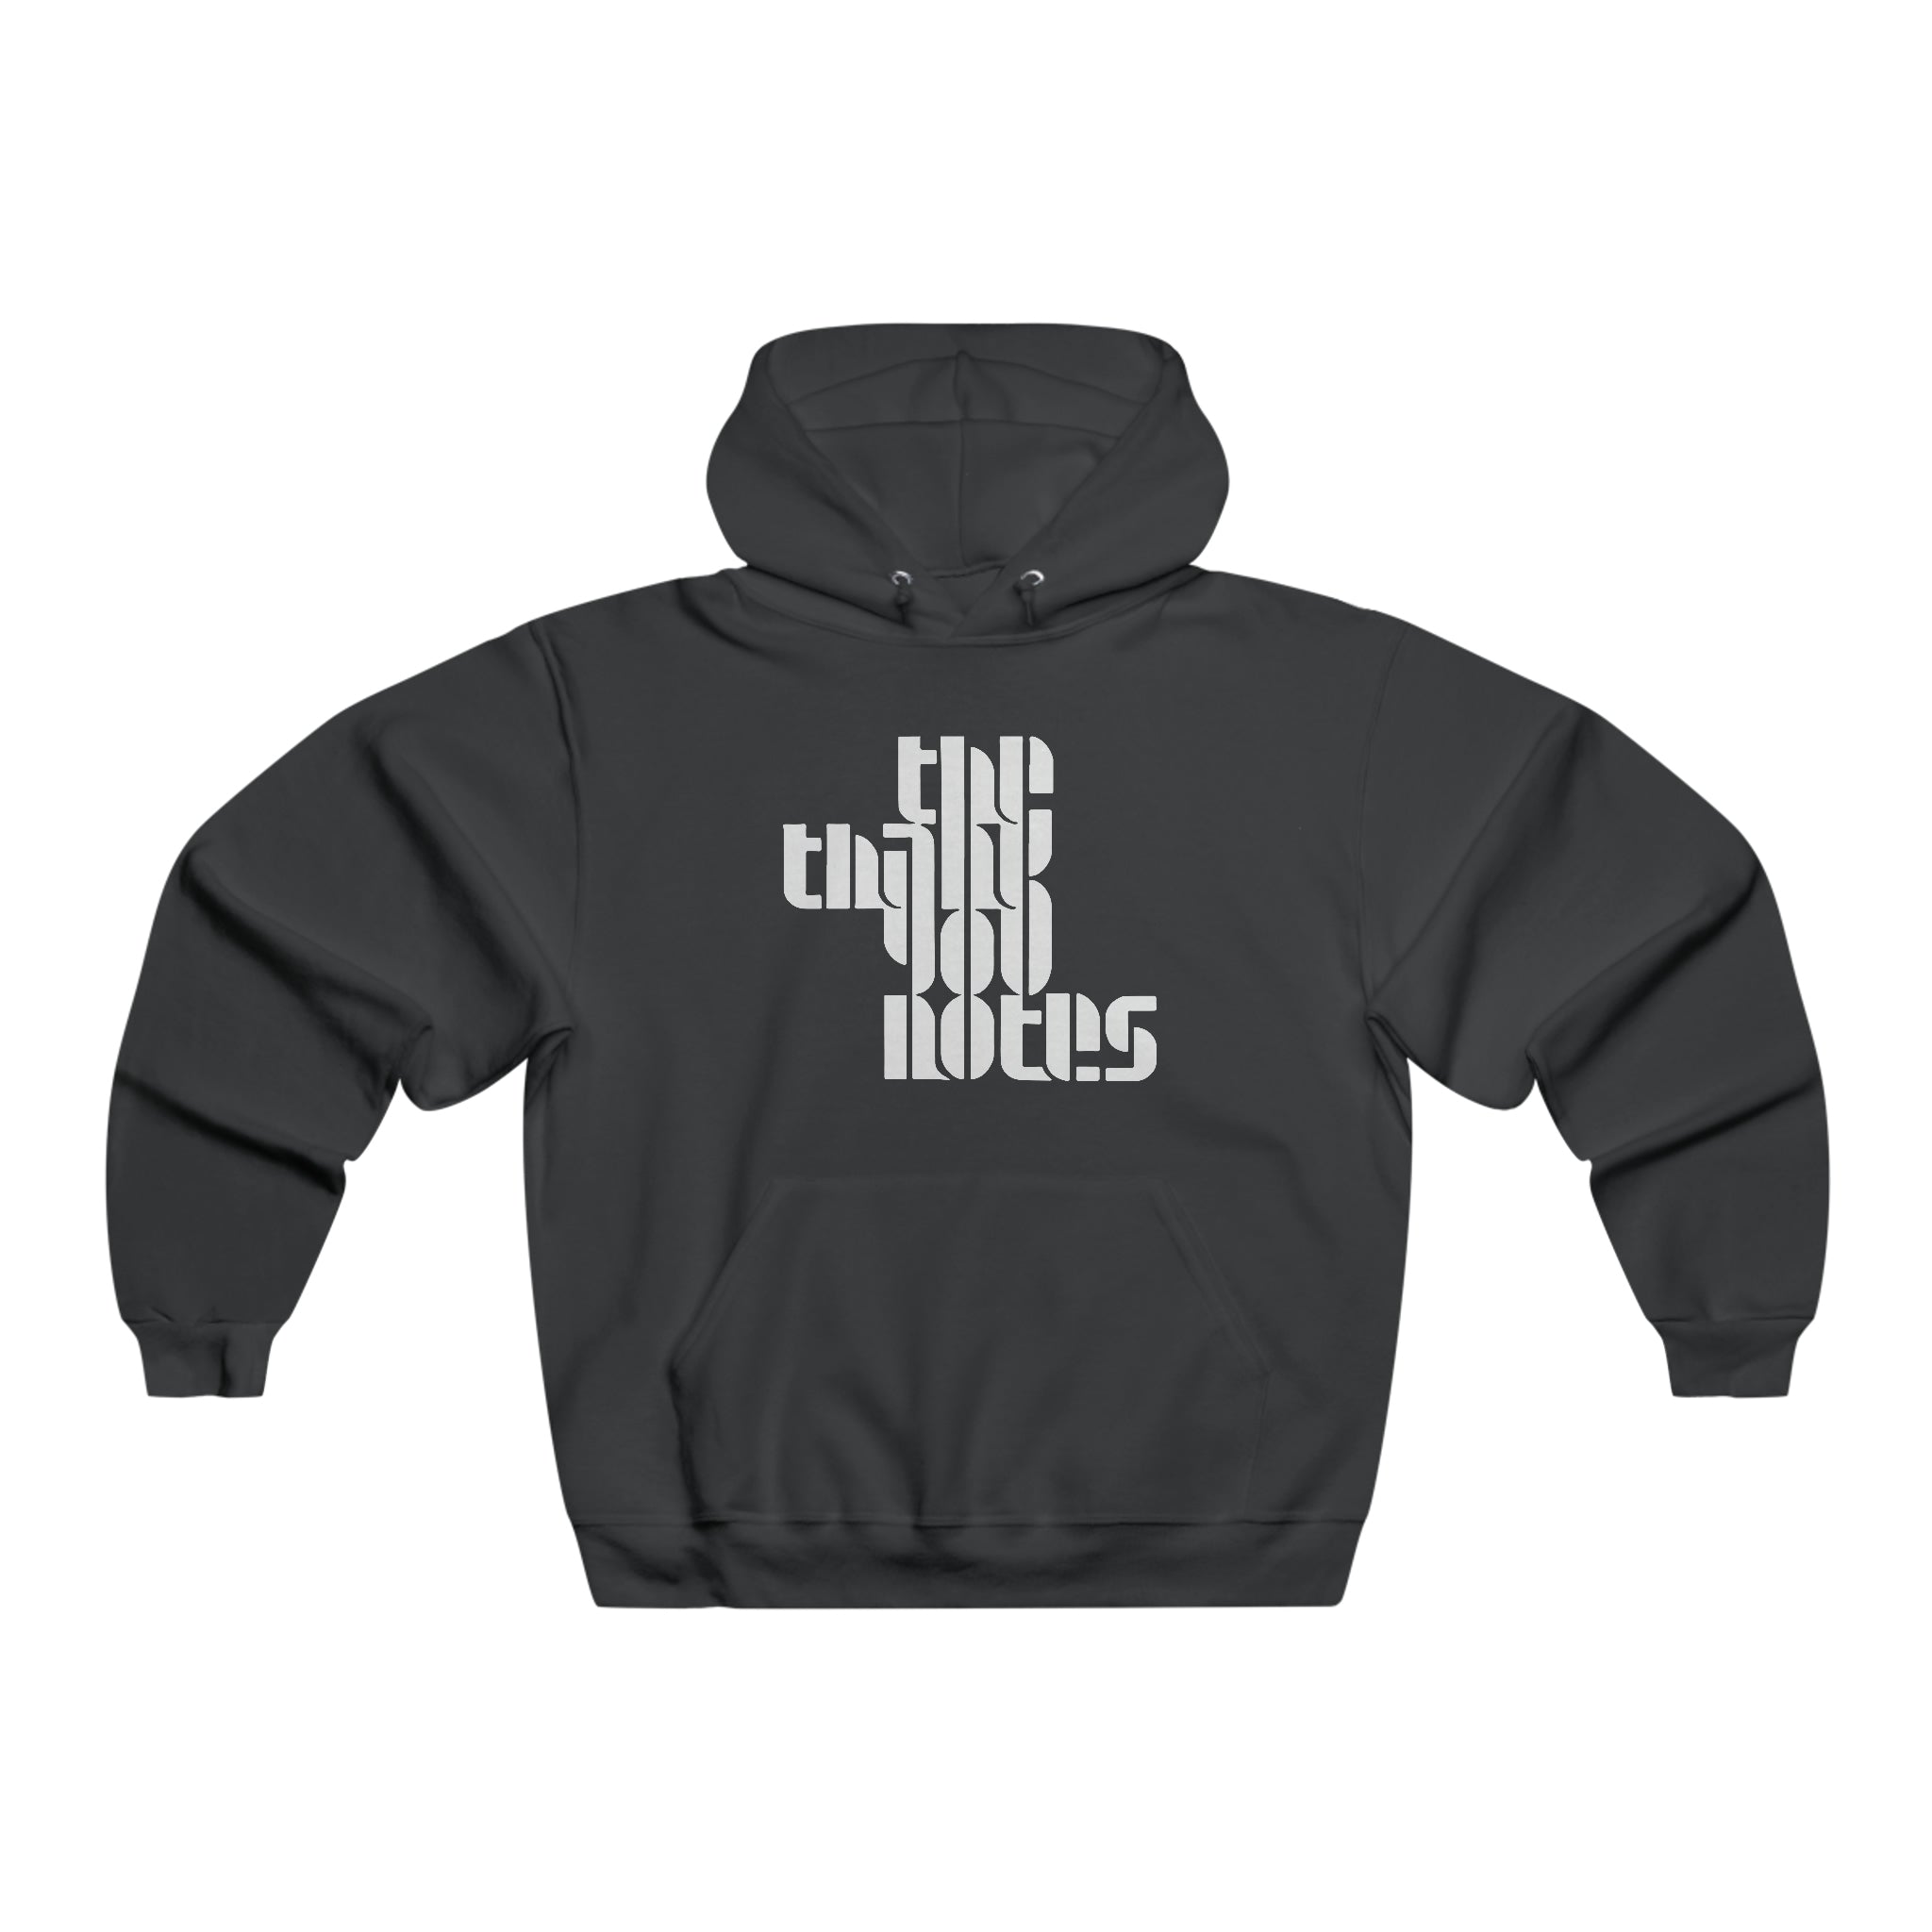 Official The Thank You Notes Hooded Sweatshirt